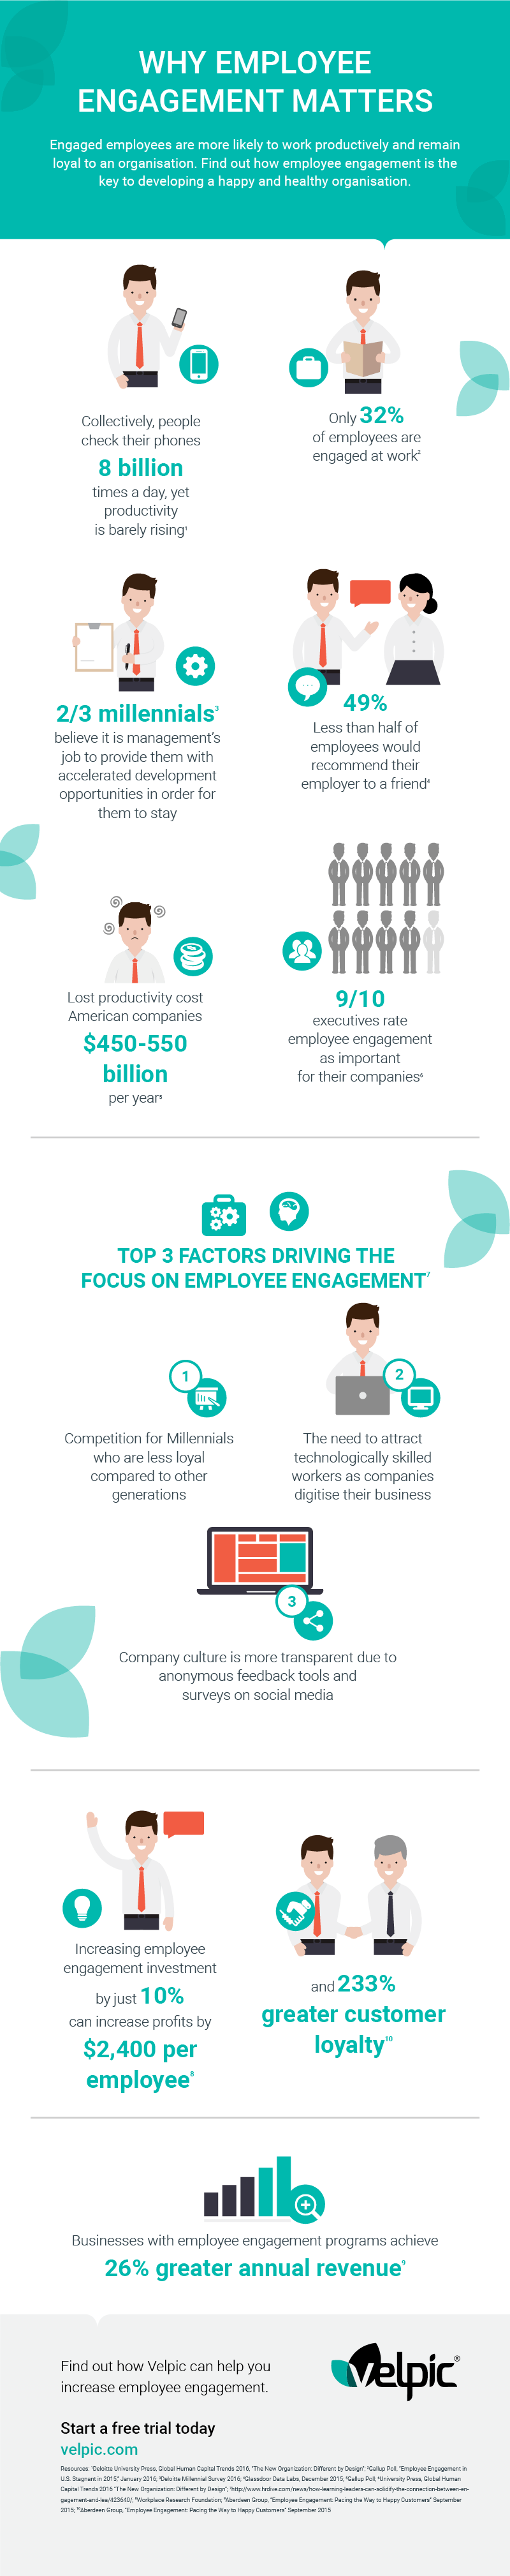 Employee Engagement Software & Employee Feedback Software Industry 2019- Competitive Landscape, Market Future And Key Players Analysis